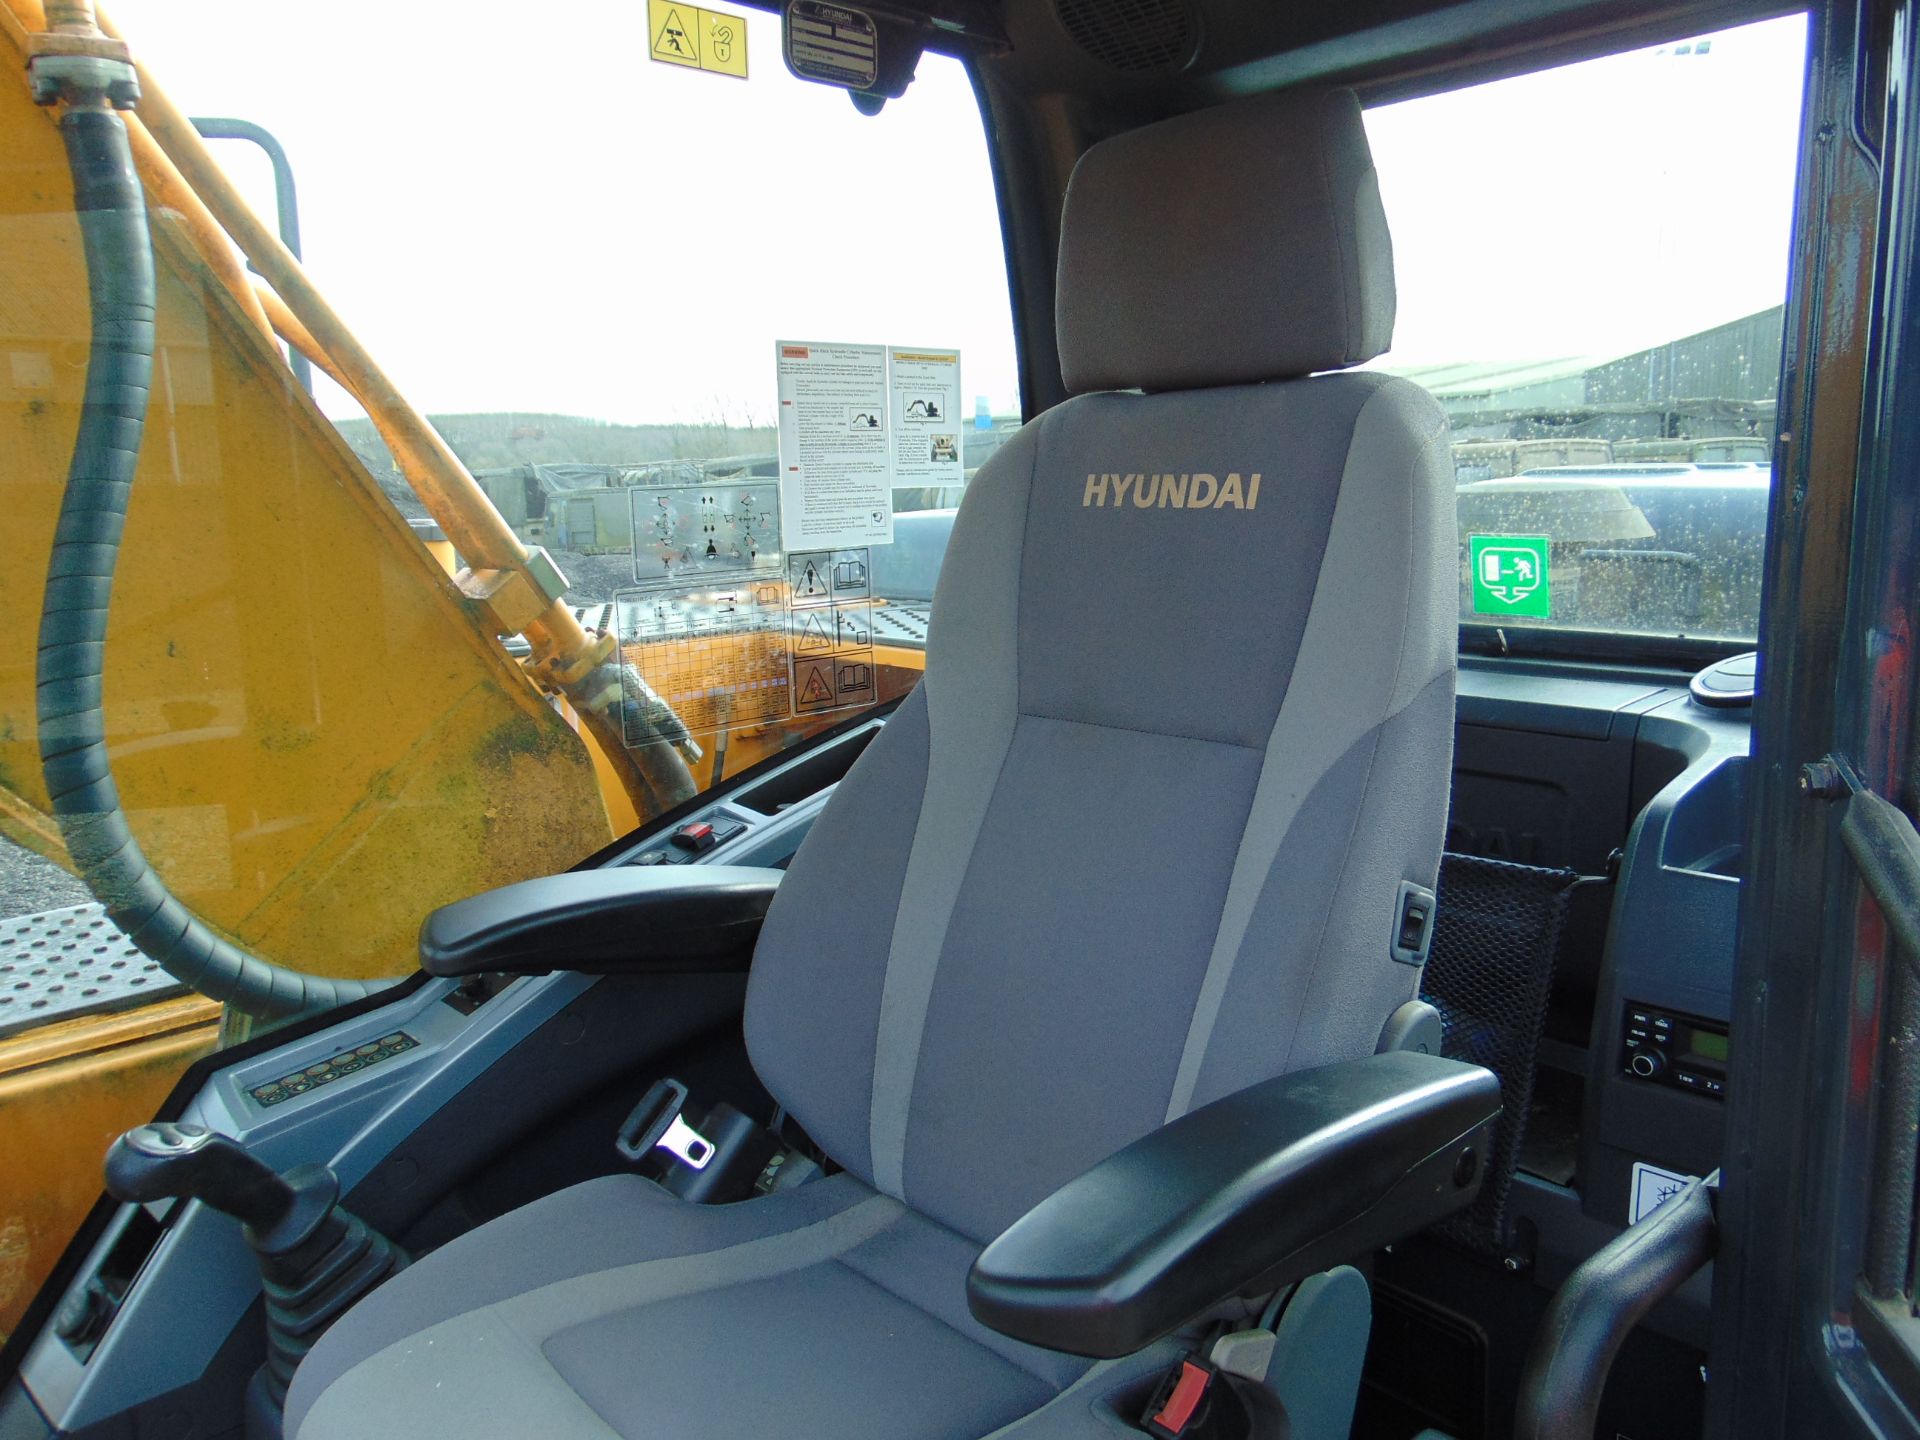 2012 Hyundai Robex 210 LC-9 Crawler Excavator ONLY 1,148 Hours Warranted. - Image 20 of 25